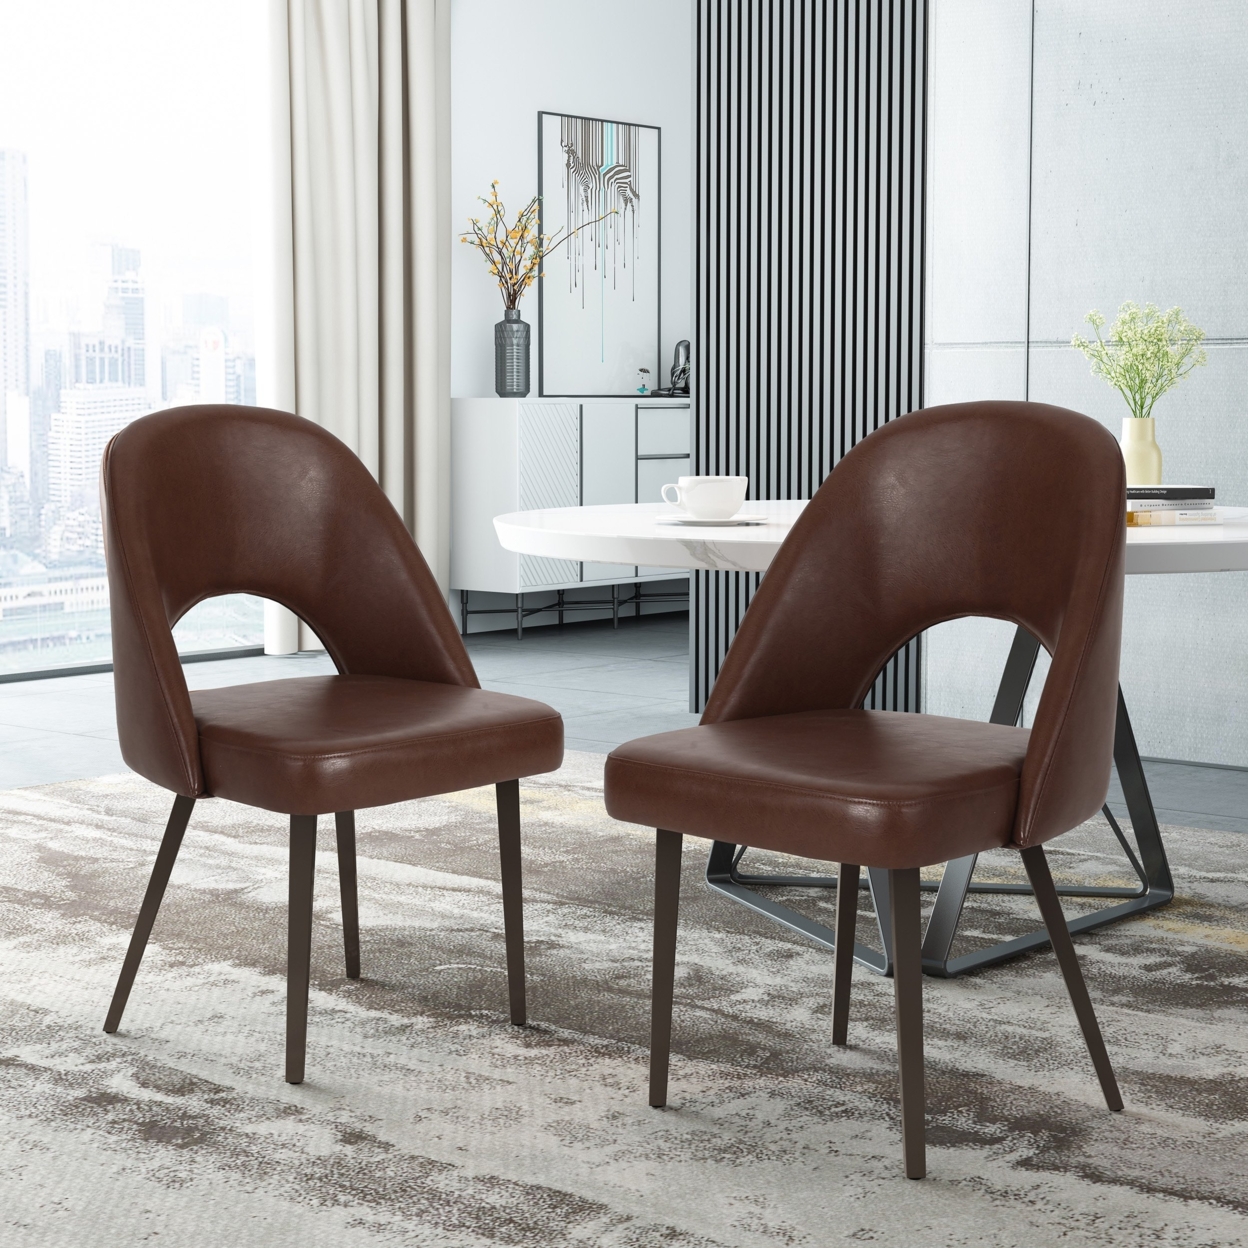 Odum Abbeville Contemporary Open Back Dining Chairs, Set Of 2 - Dark Brown/gun Metal